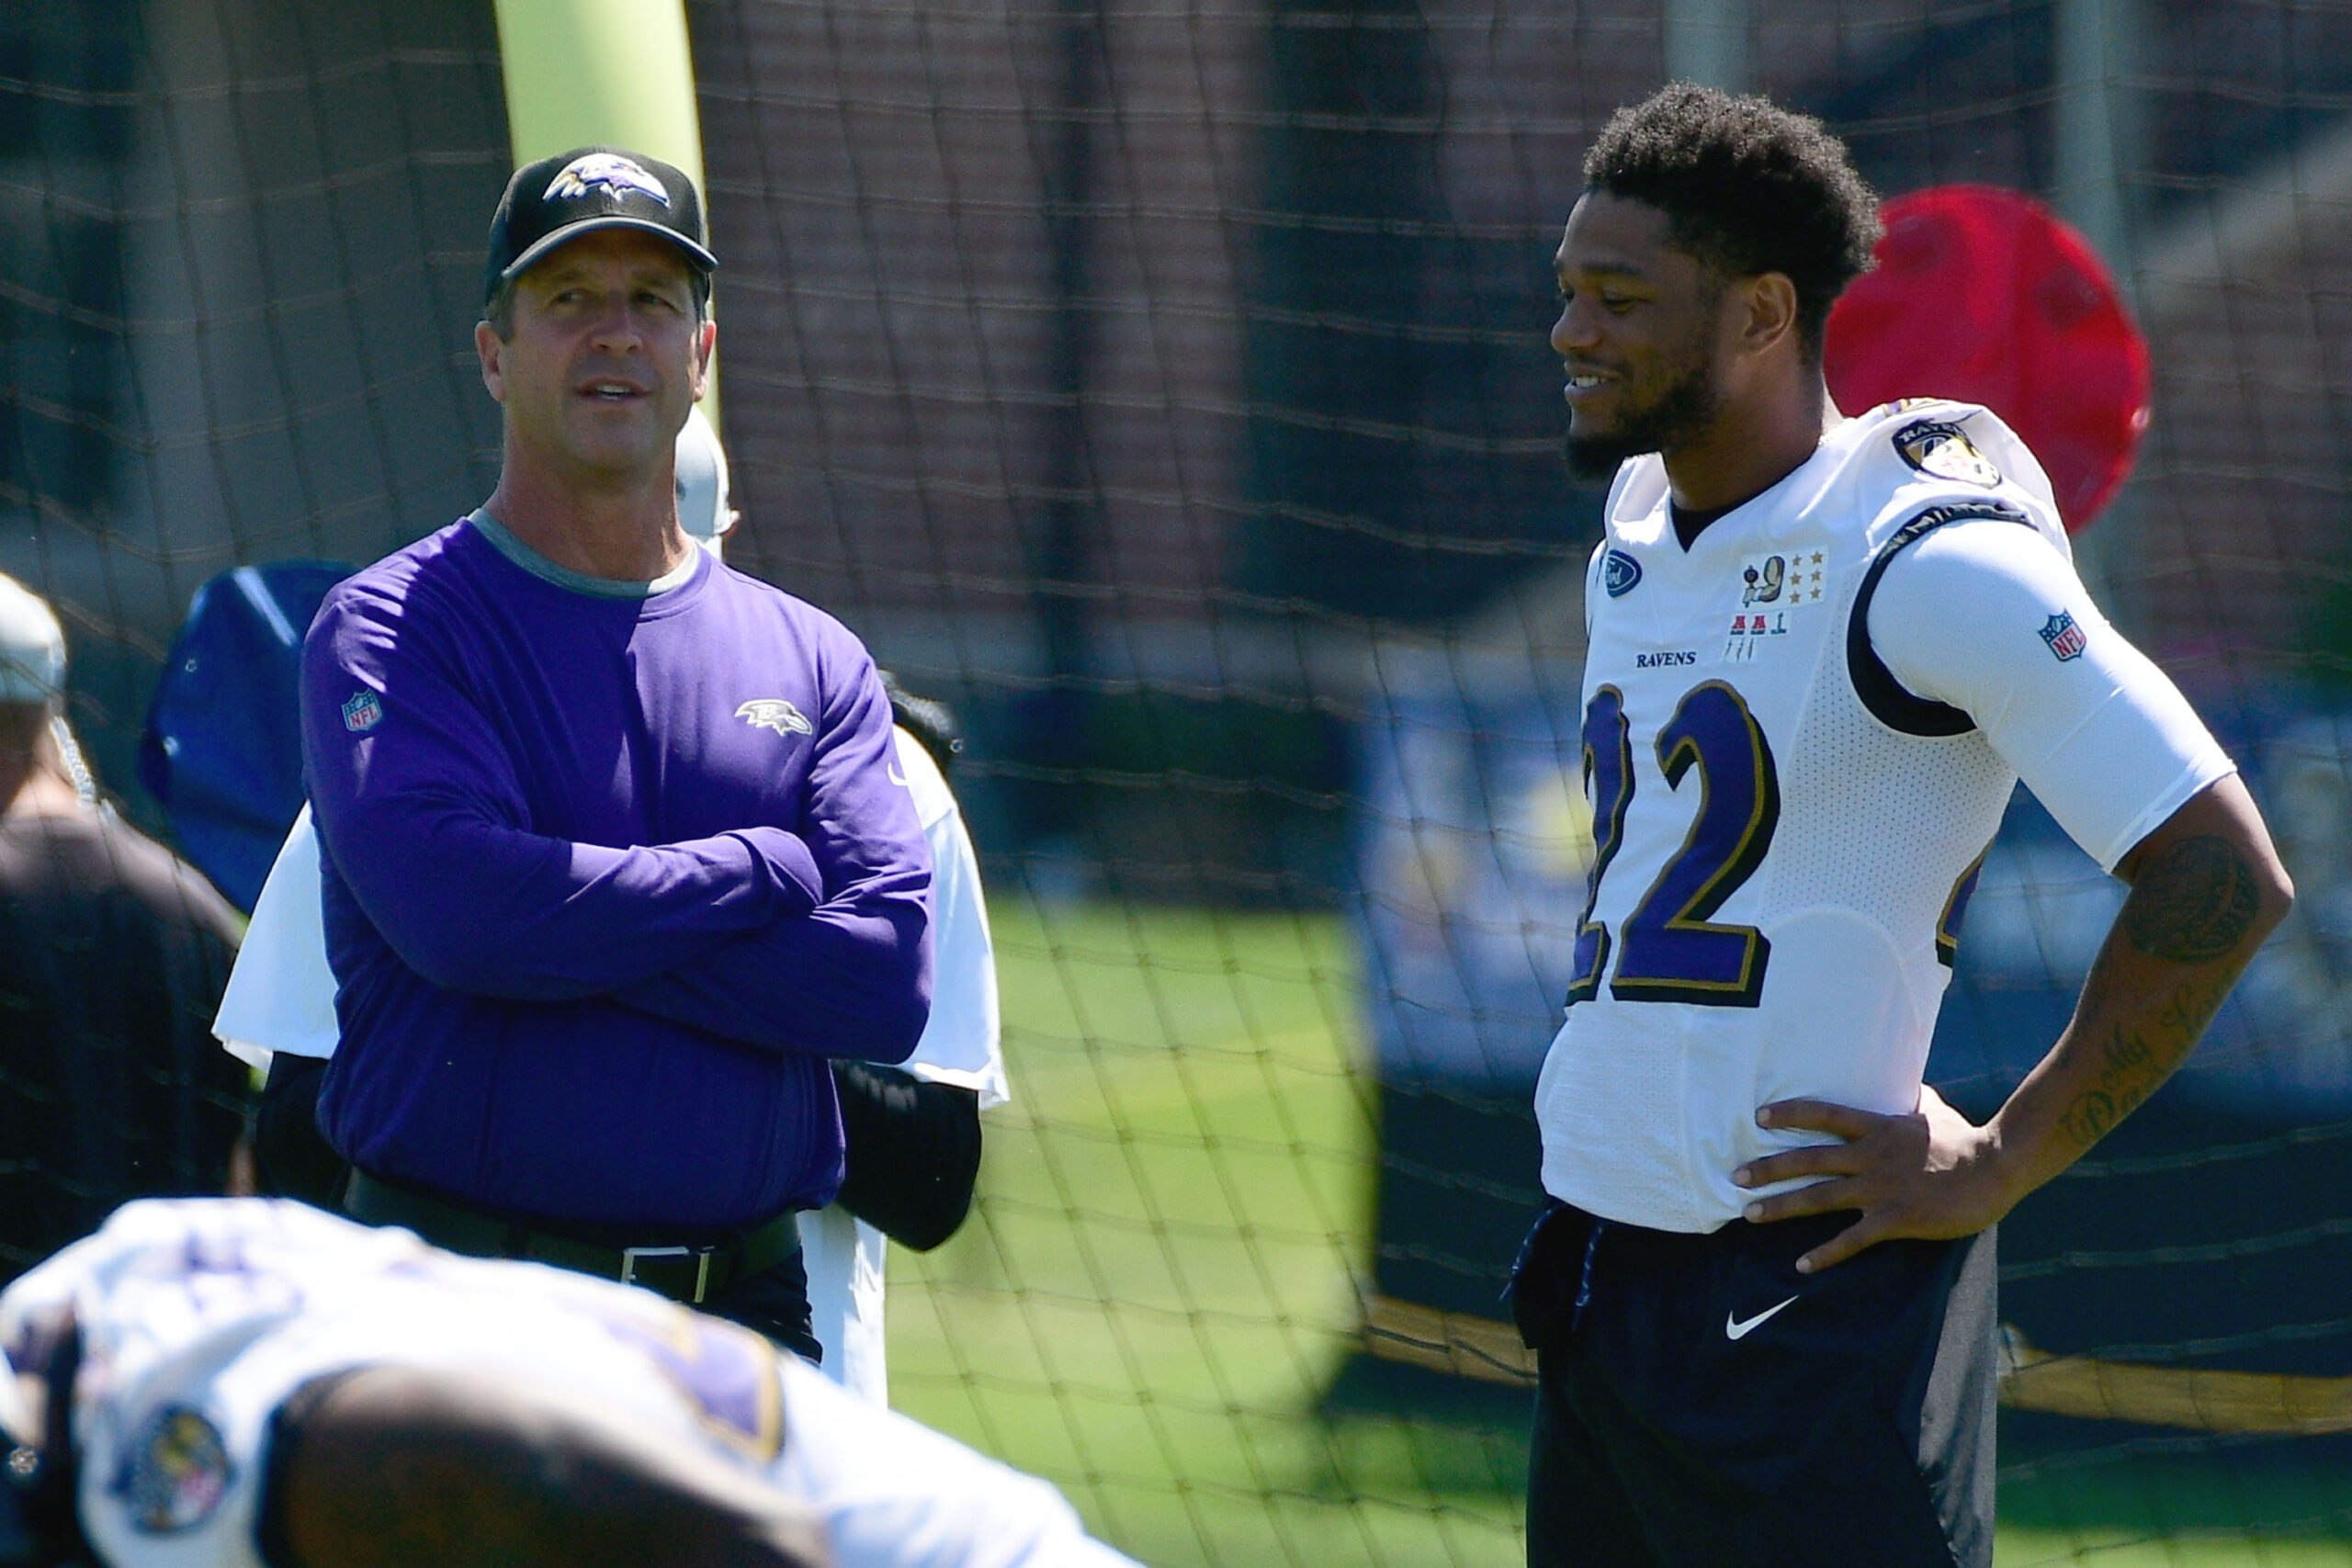 John Harbaugh and Jimmy Smith chat at practice.